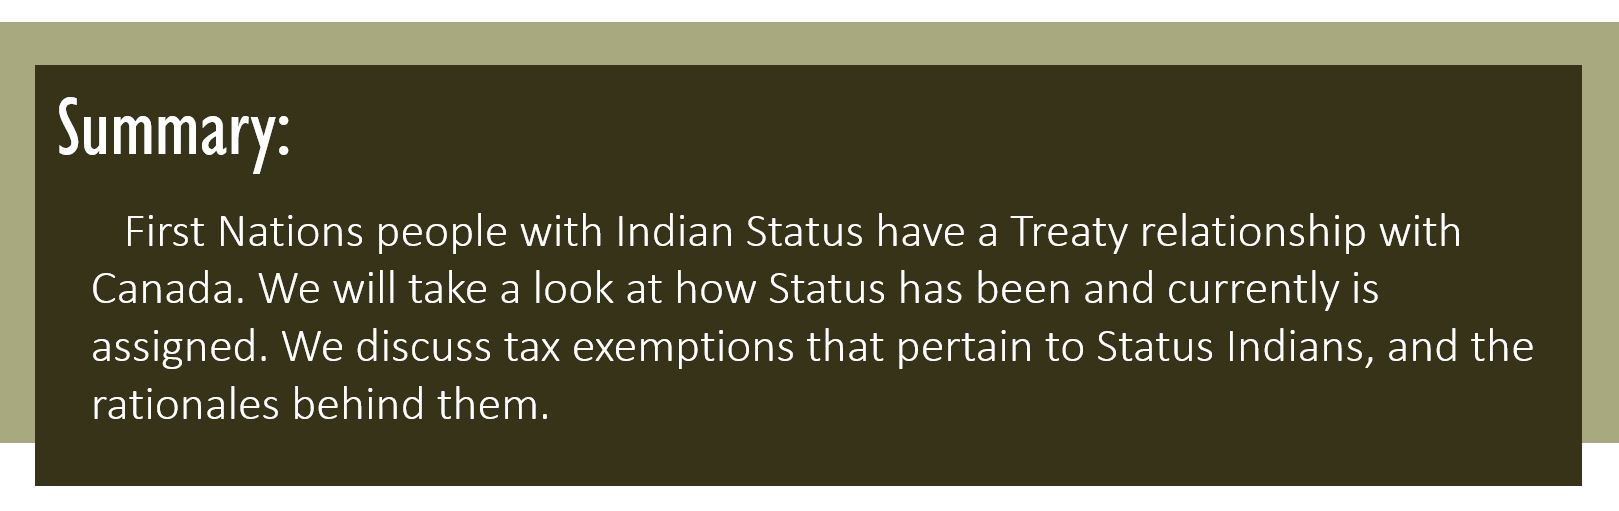 Summary: First Nations people with Indian Status have a treaty relationship with Canada. We will take a look at how Status has been and currently is assigned. We discuss tax exemptions that pertain to Status Indians, and the rationales behind them.